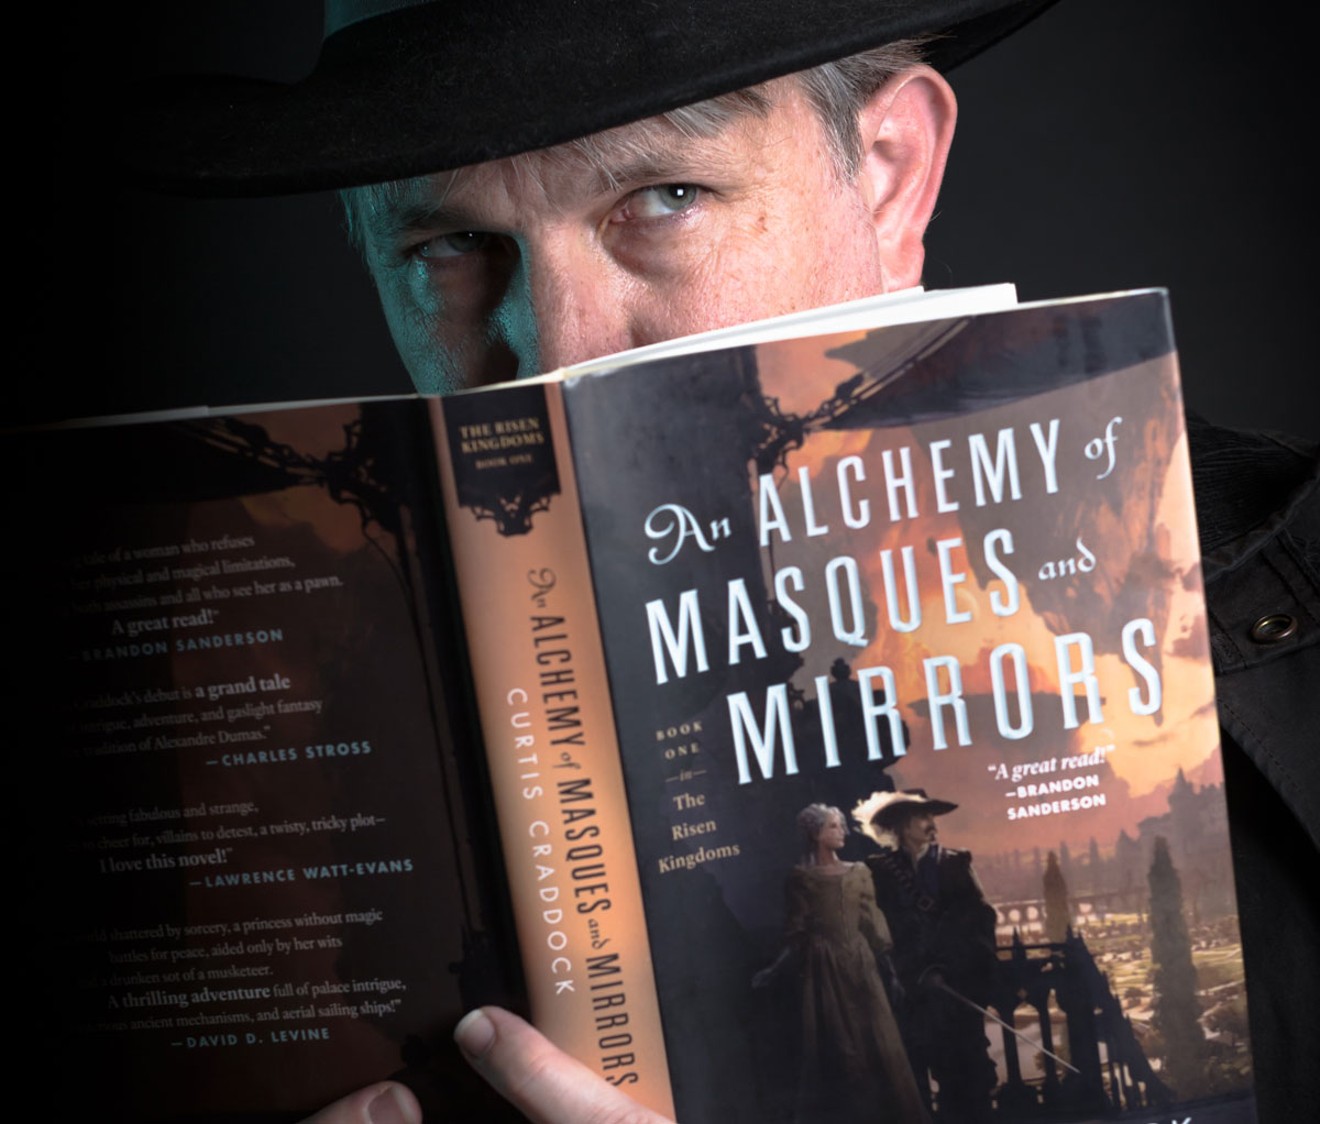 After 32 years as a struggling writer, Craddock saw his first major novel, An Alchemy of Masques and Mirrors, published.